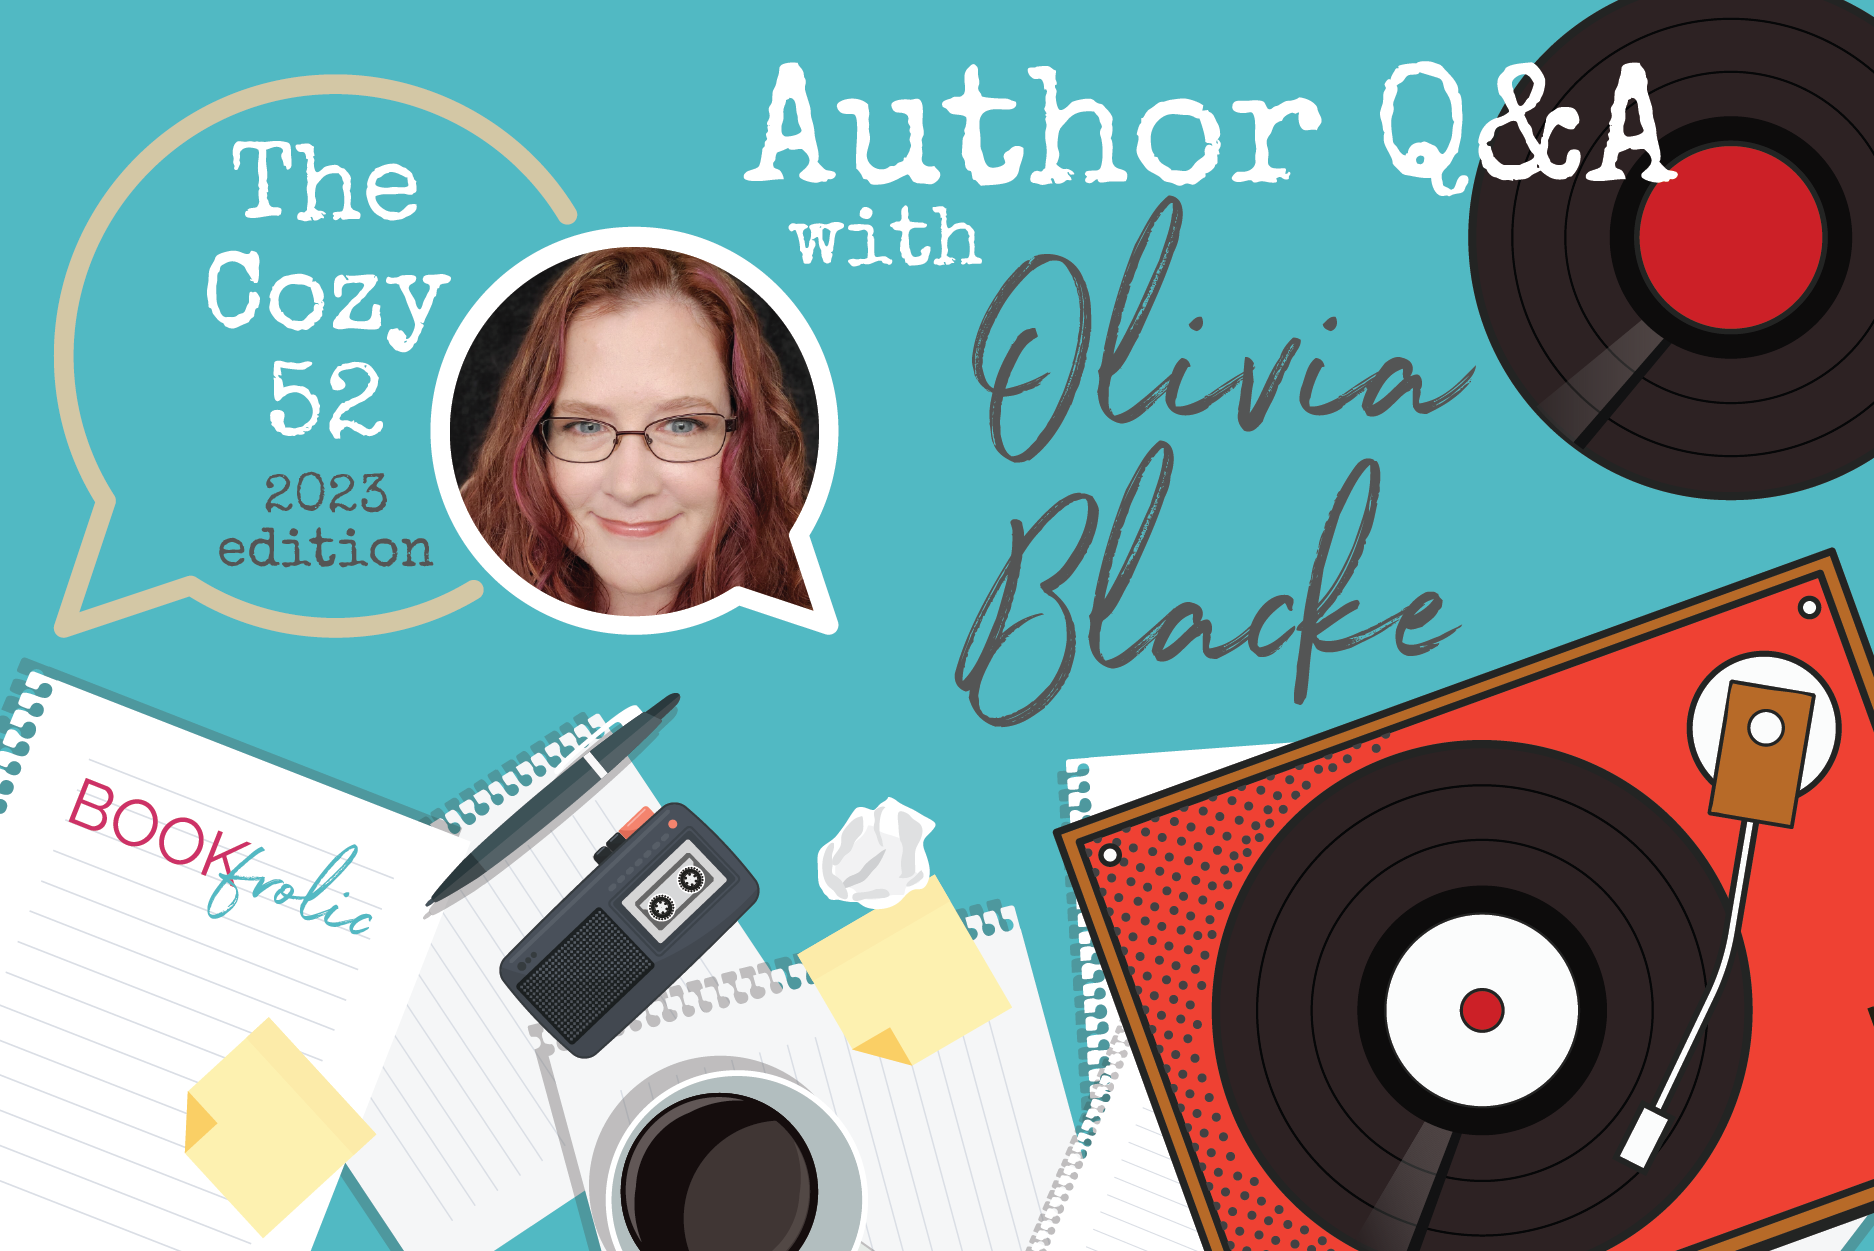 banner for interview with Olivia Blacke